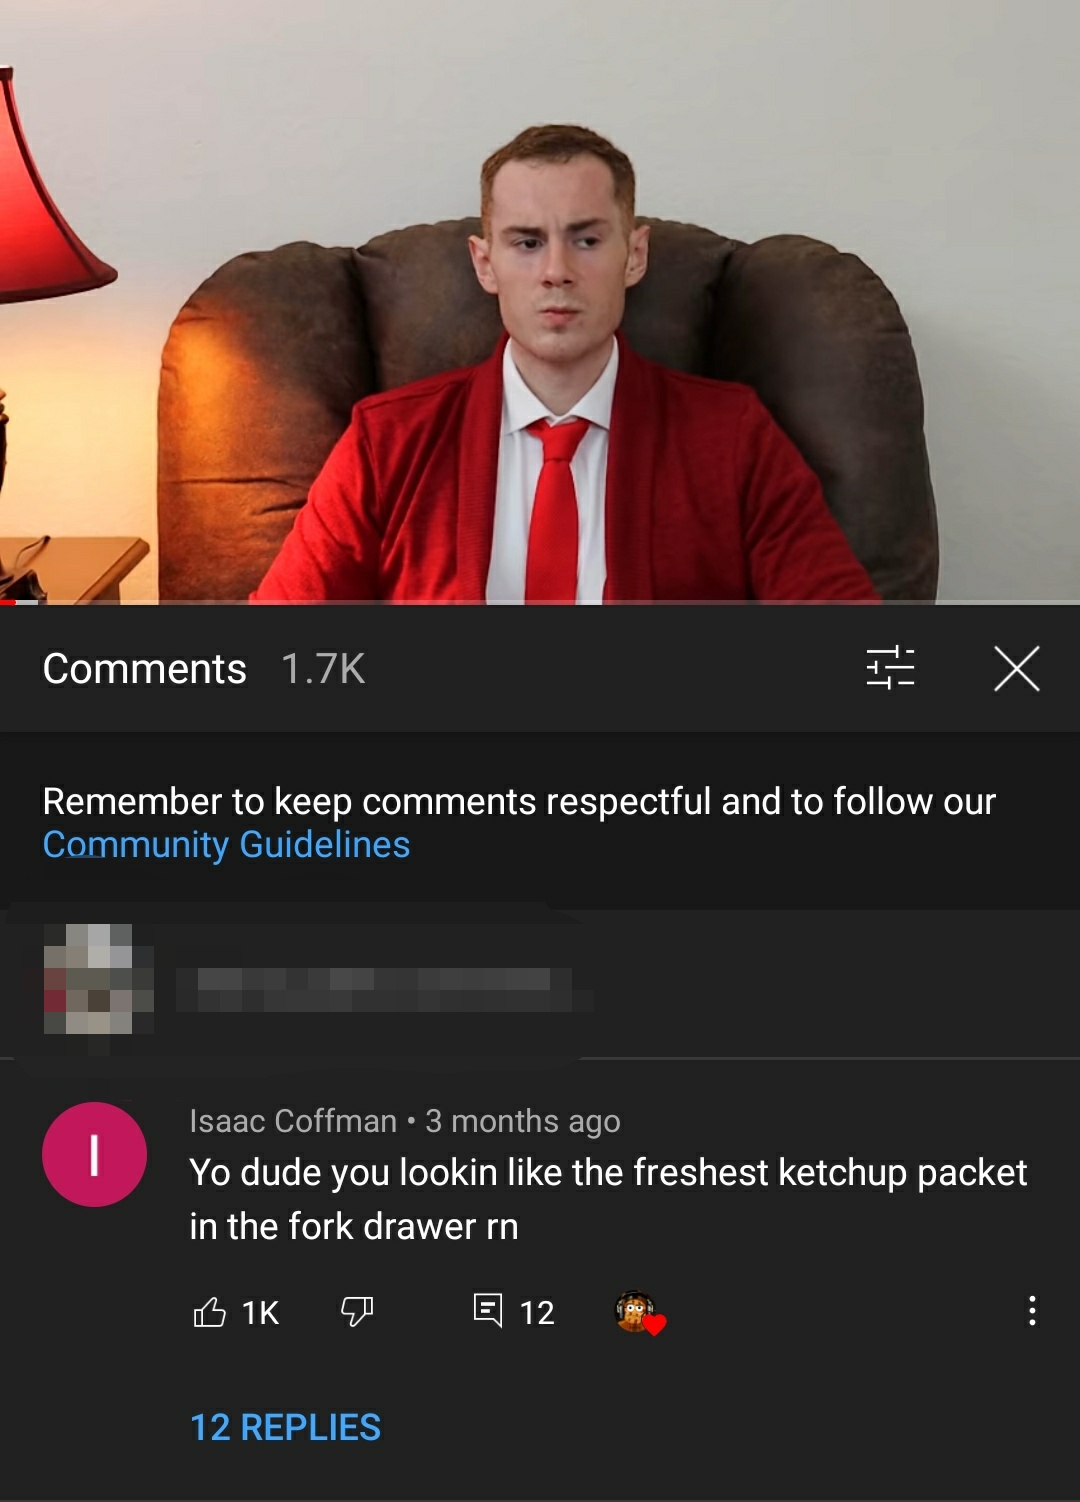 photo caption - Remember to keep respectful and to our Community Guidelines Isaac Coffman 3 months ago Yo dude you lookin the freshest ketchup packet in the fork drawer rn B 1K 12 12 Replies